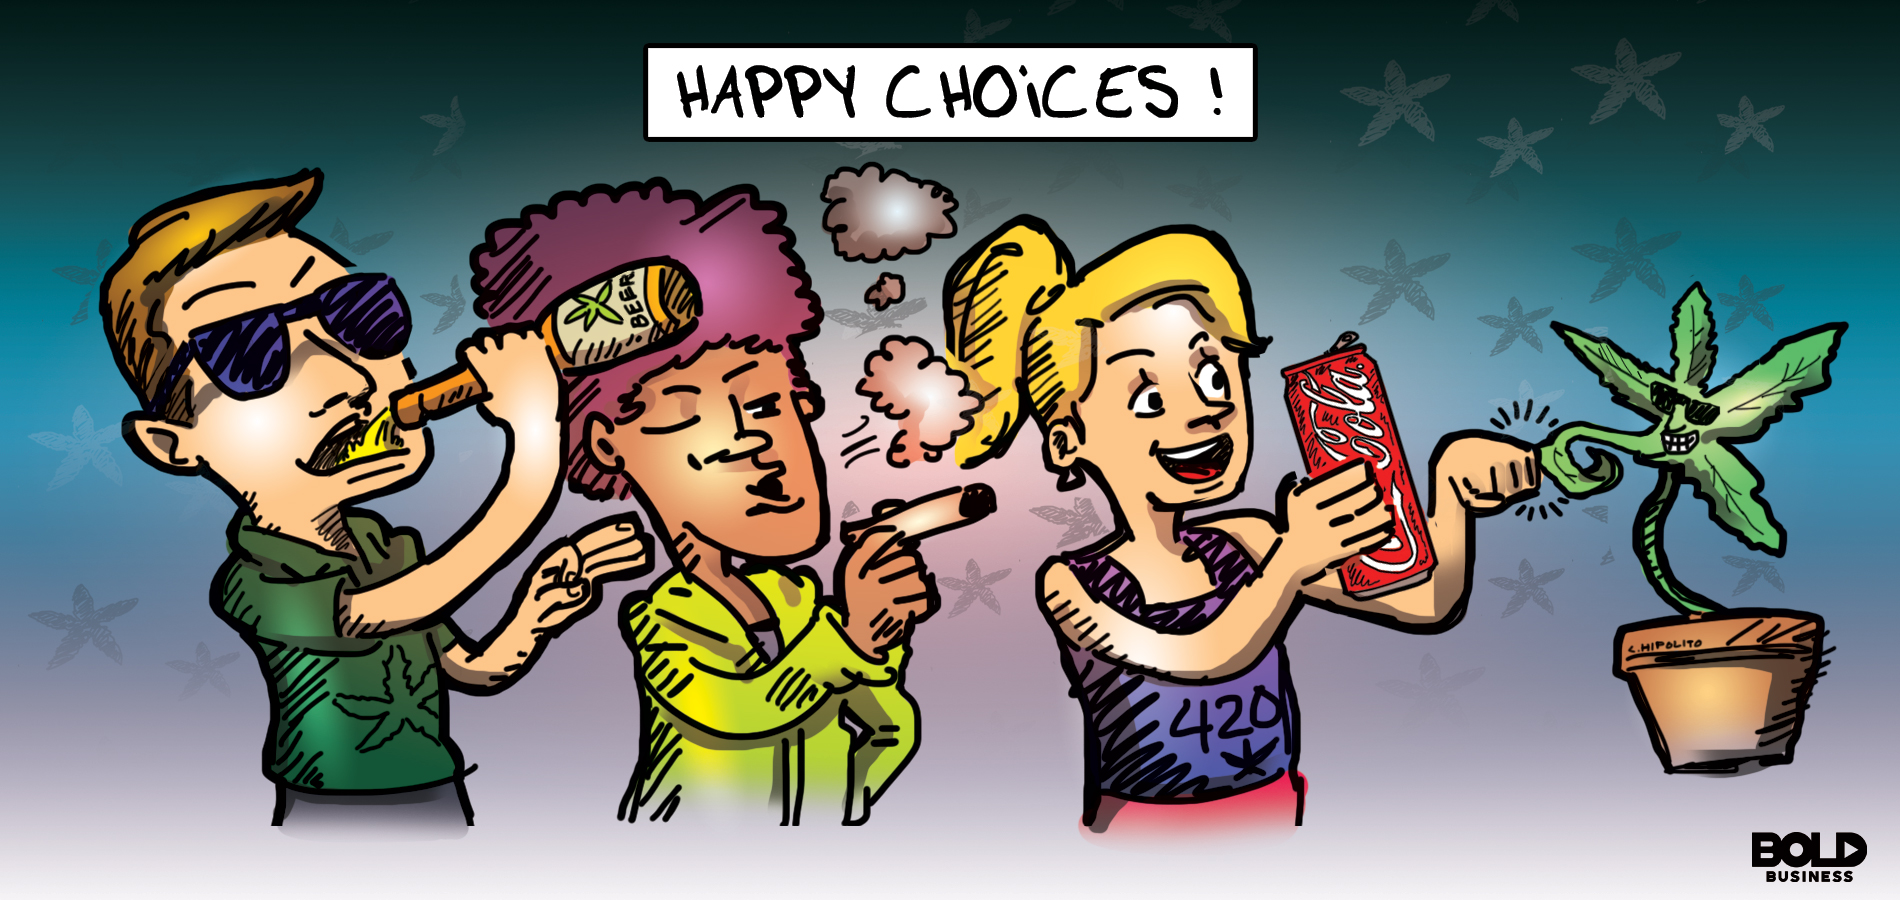 cartoon of a man and two other women using products with cannabis like cannabis-infused beer and coca-cola and marijuana joint